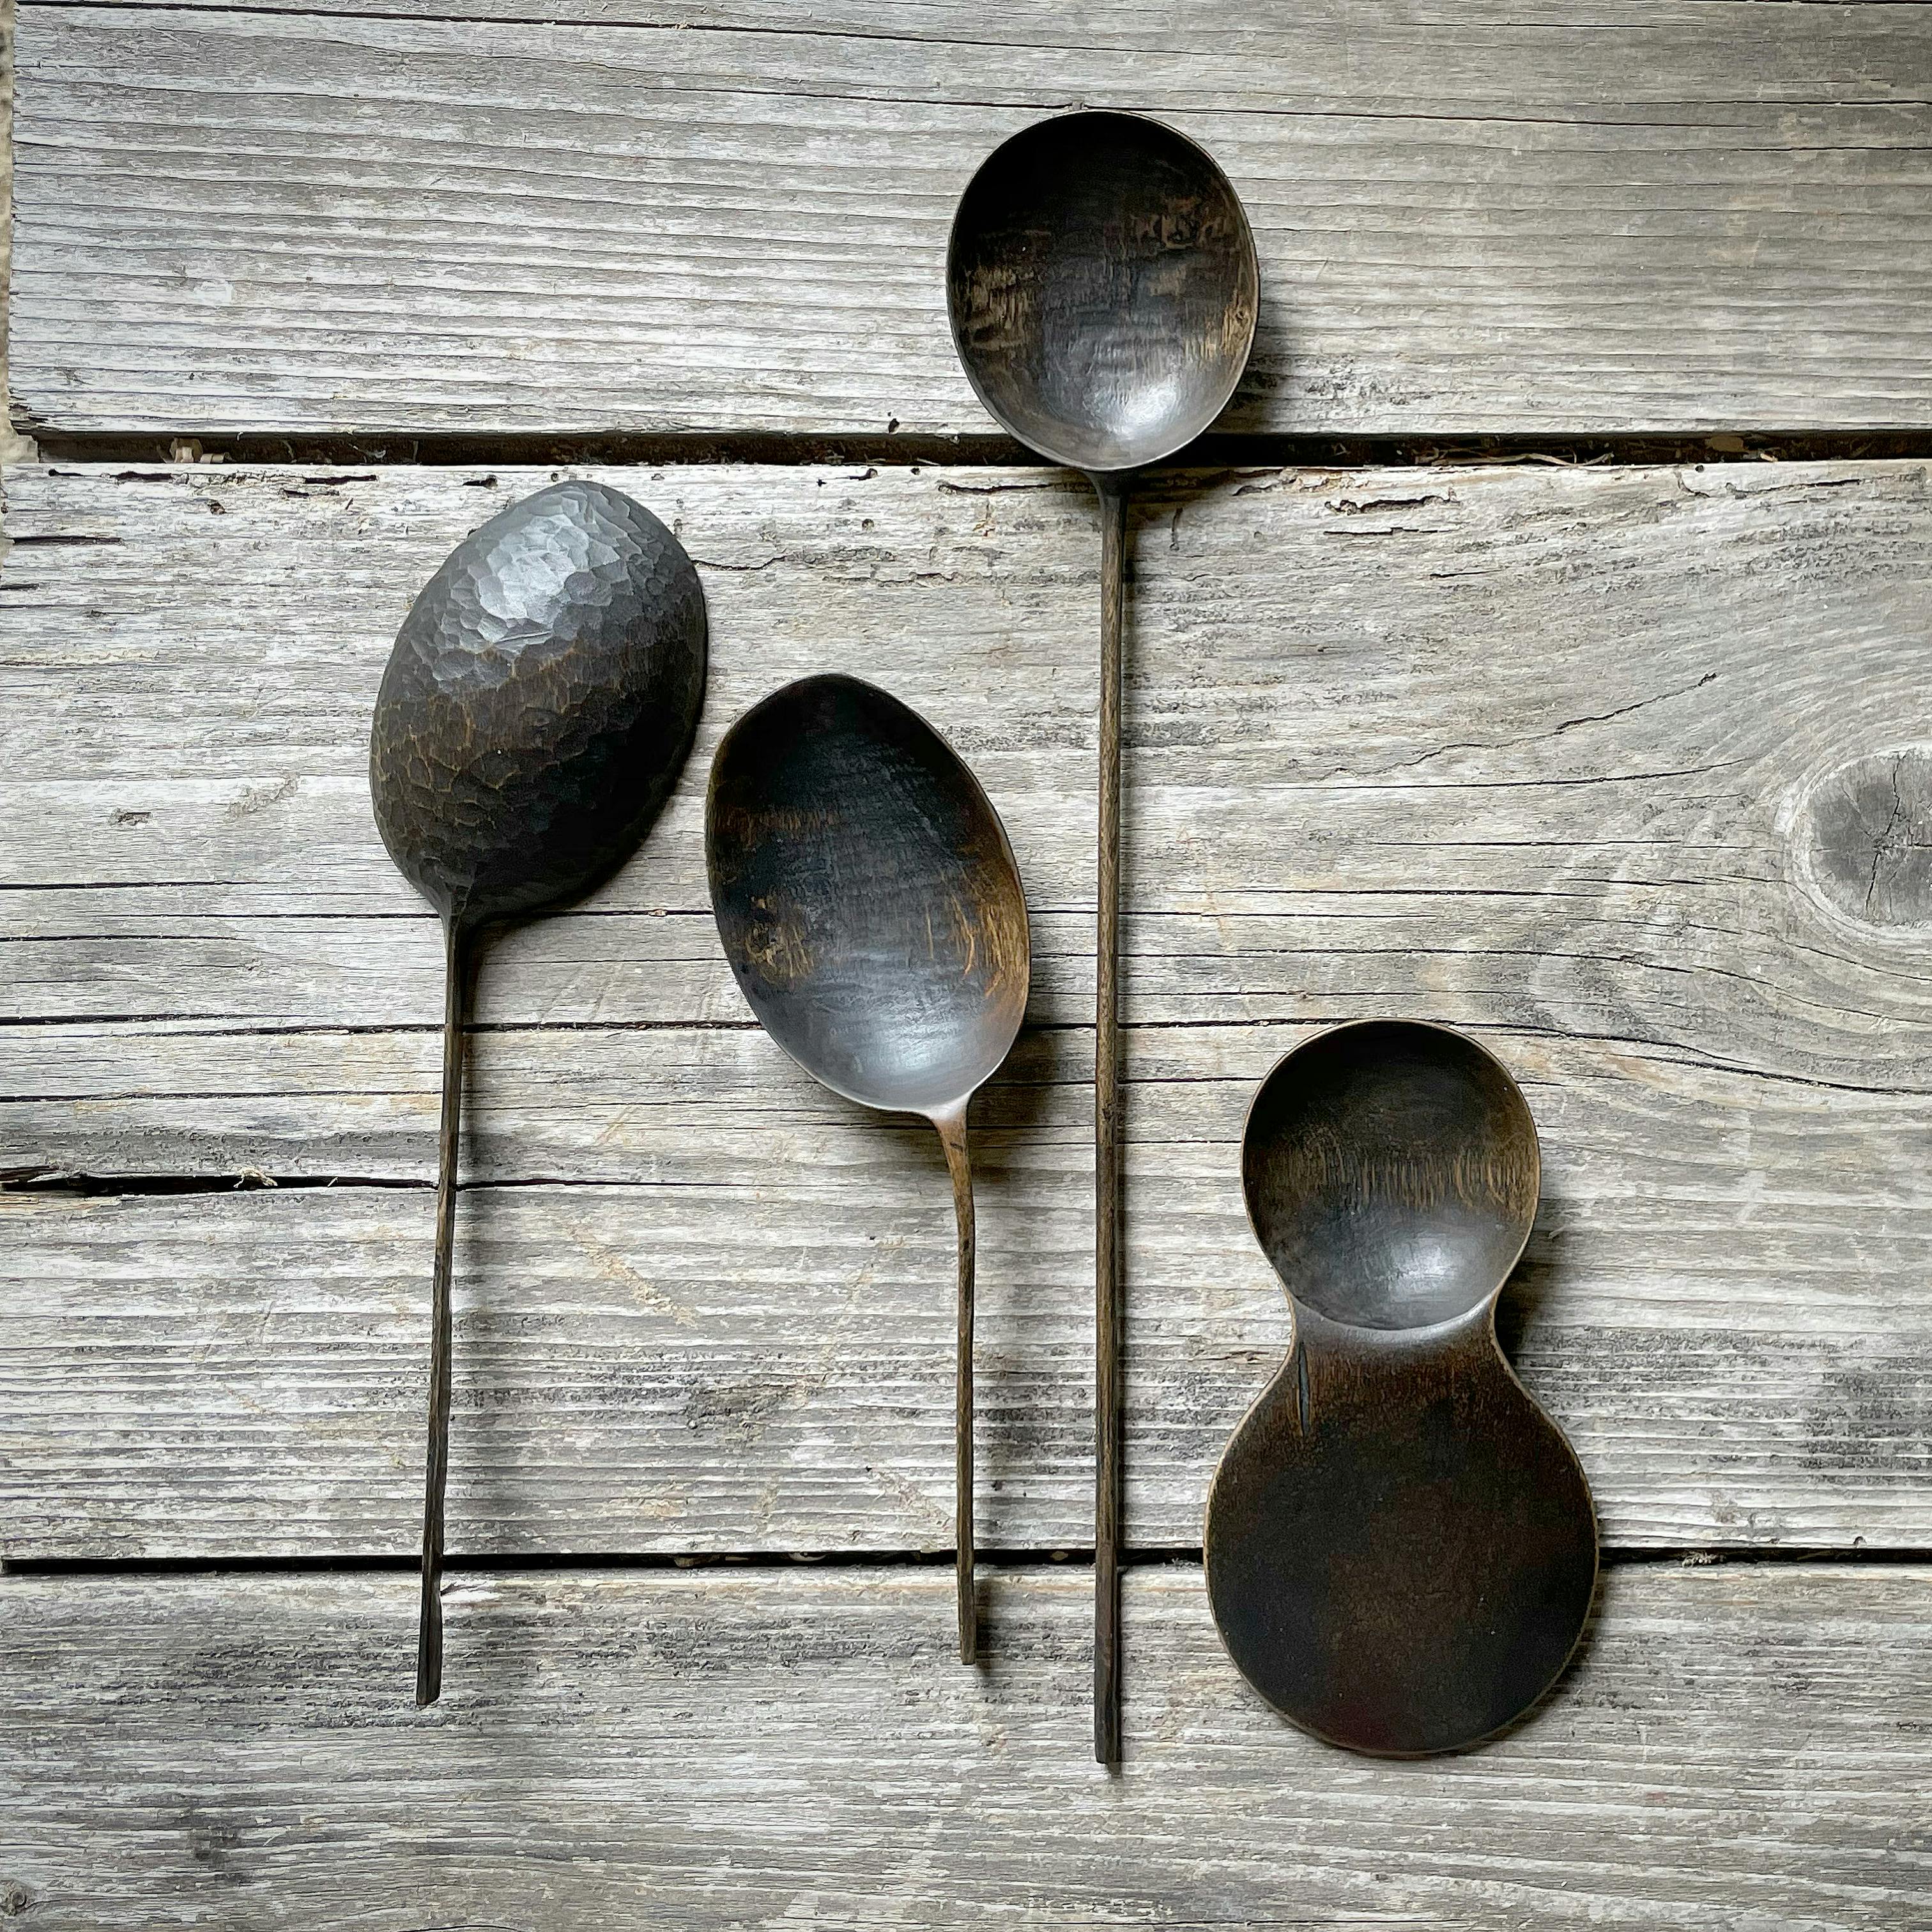 Four handmade wooden spoons of varied shapes pictured on wood planks